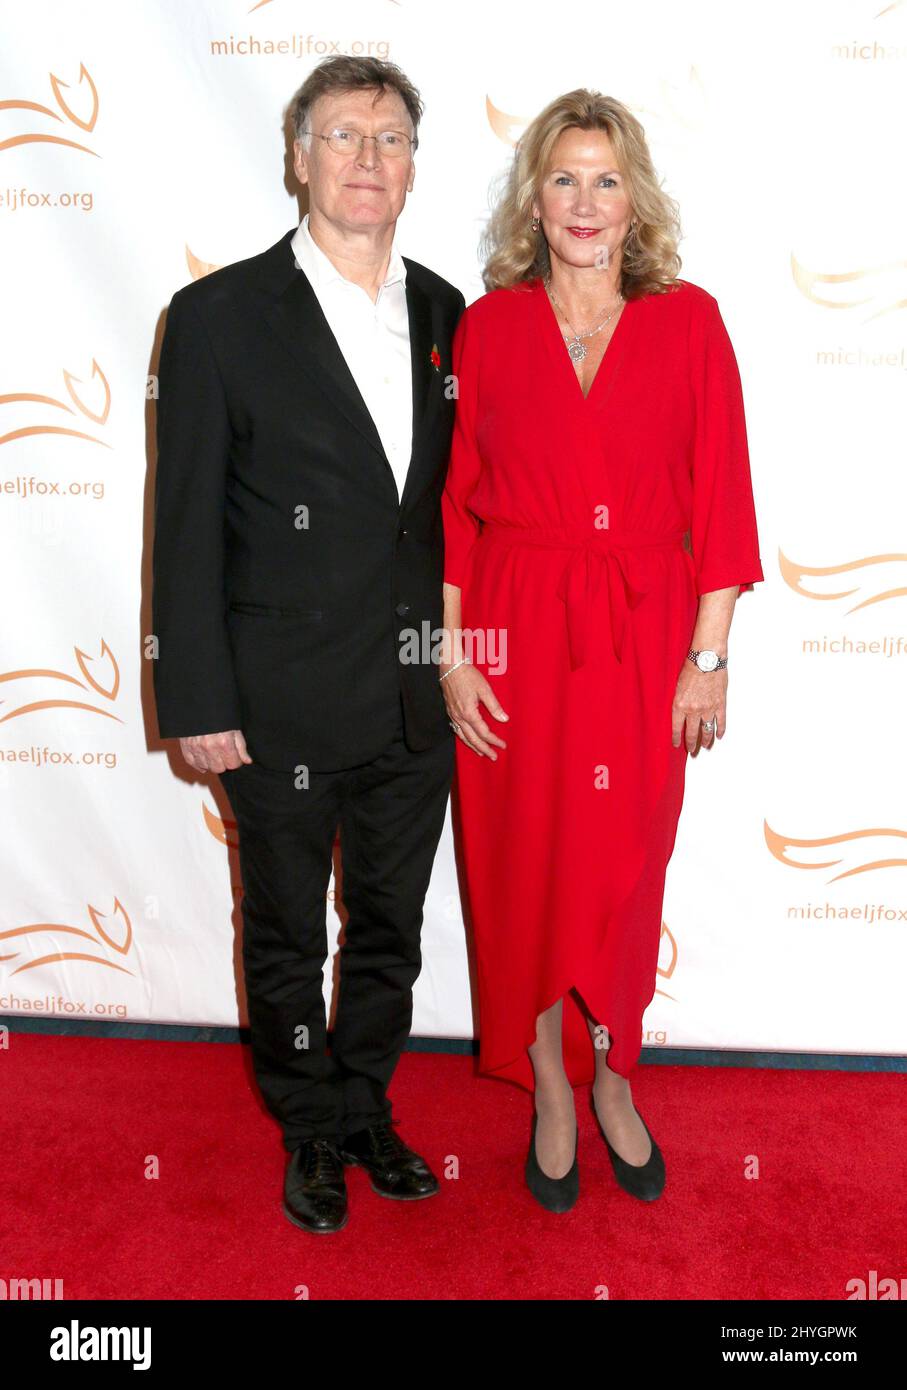 Steve Winwood & wife Eugenia Winwood at A Funny Thing Happened on the Way to Cure Parkinson's held at the Hilton New York on November 10, 2018 in New York City, NY Stock Photo